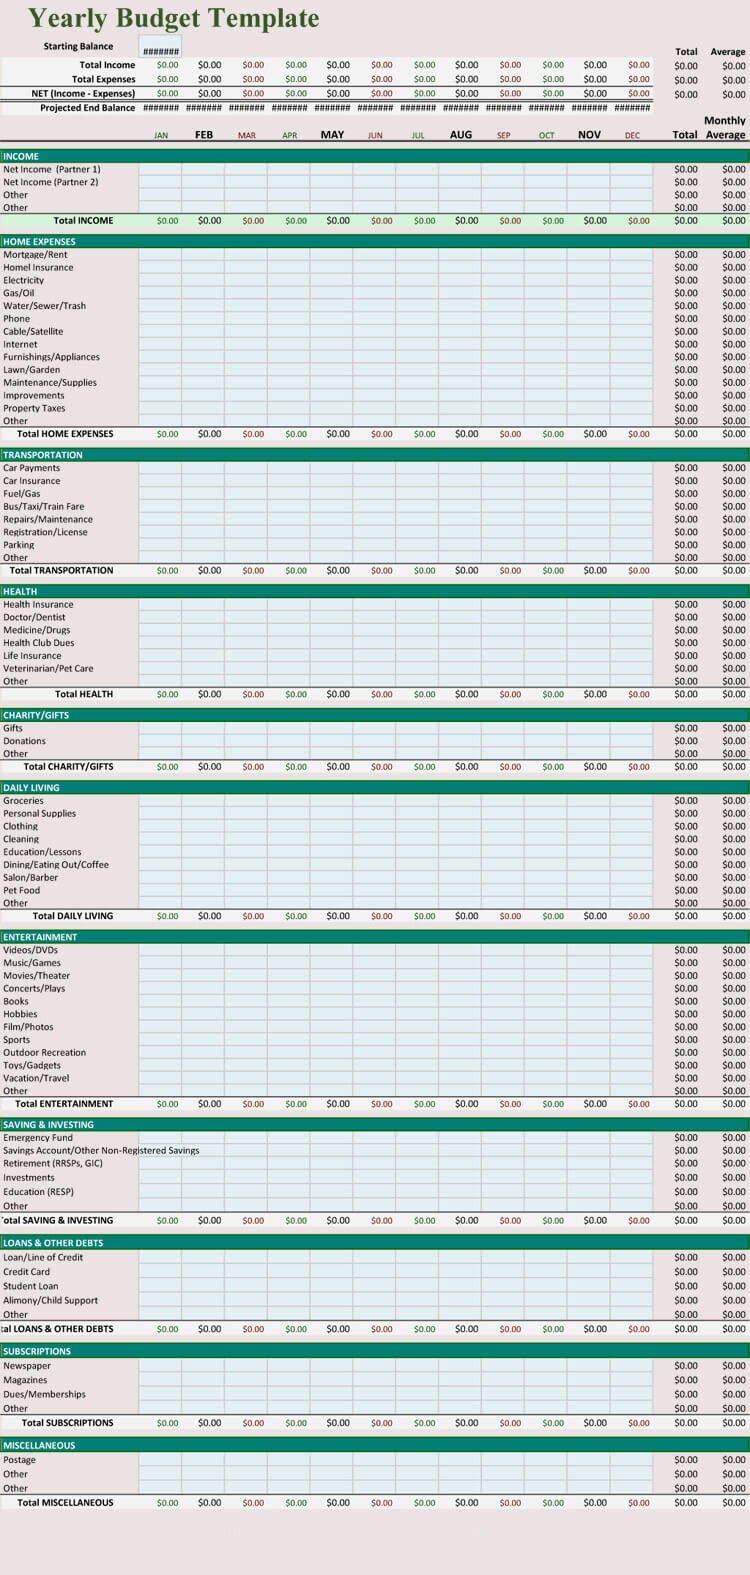 Yearly Budget Template You Should Experience Yearly Budget Template At